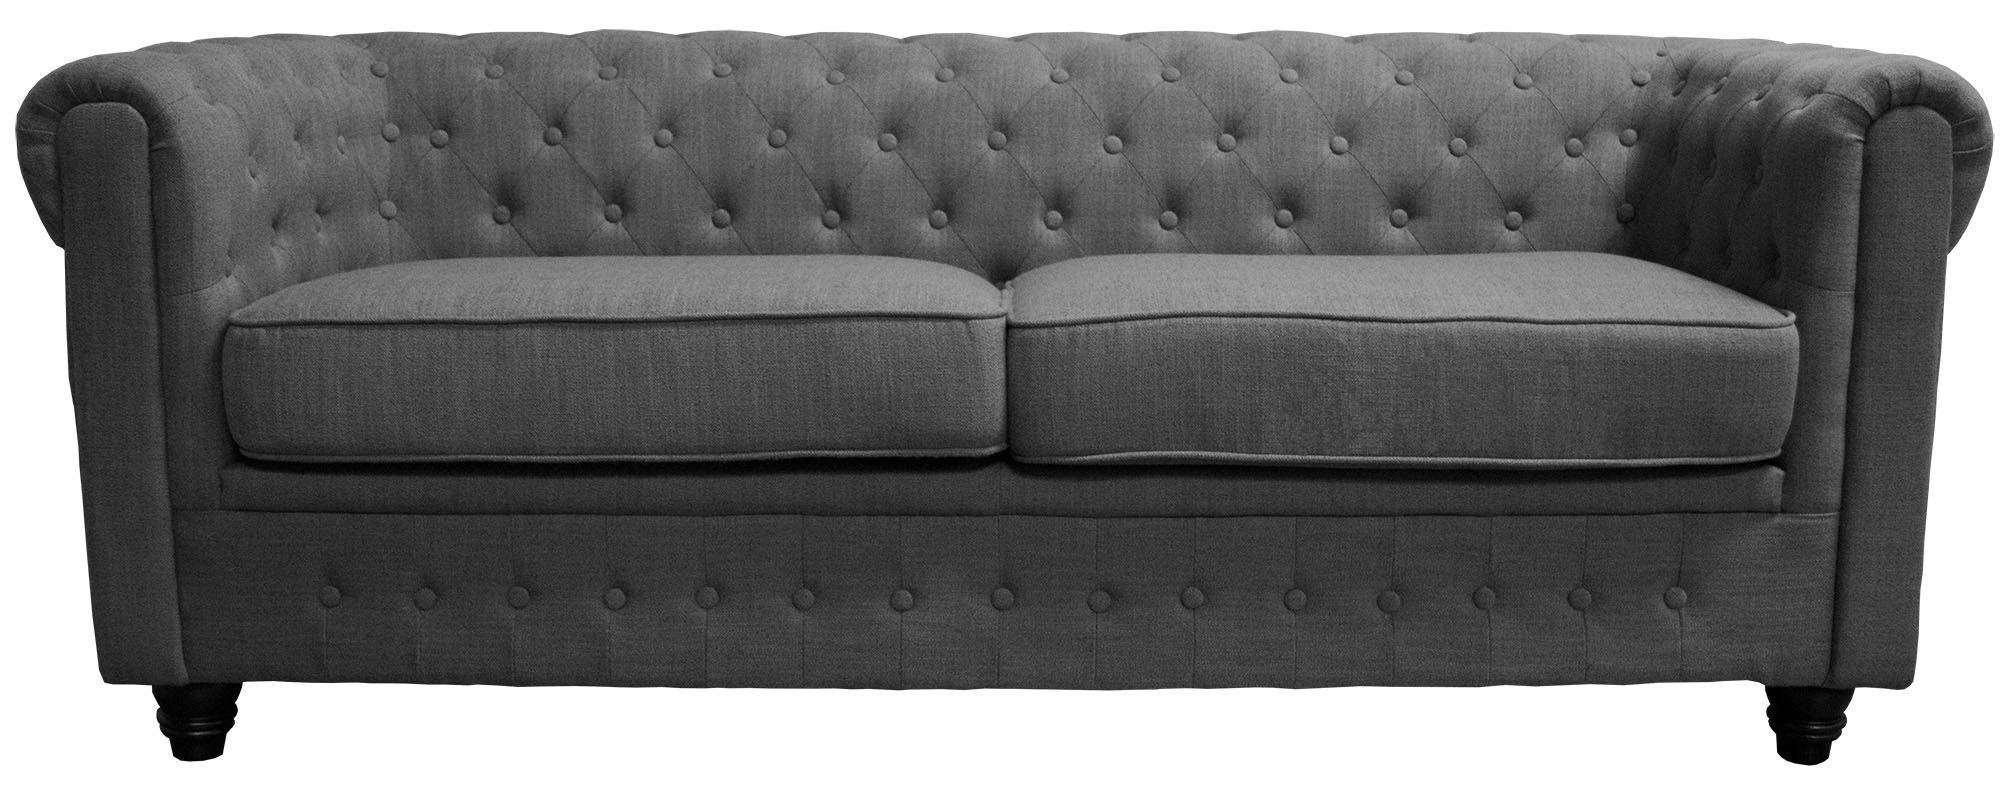 Cambridge Sofa – Charcoal Linen – Designer8 Intended For Light Charcoal Linen Sofas (View 10 of 20)